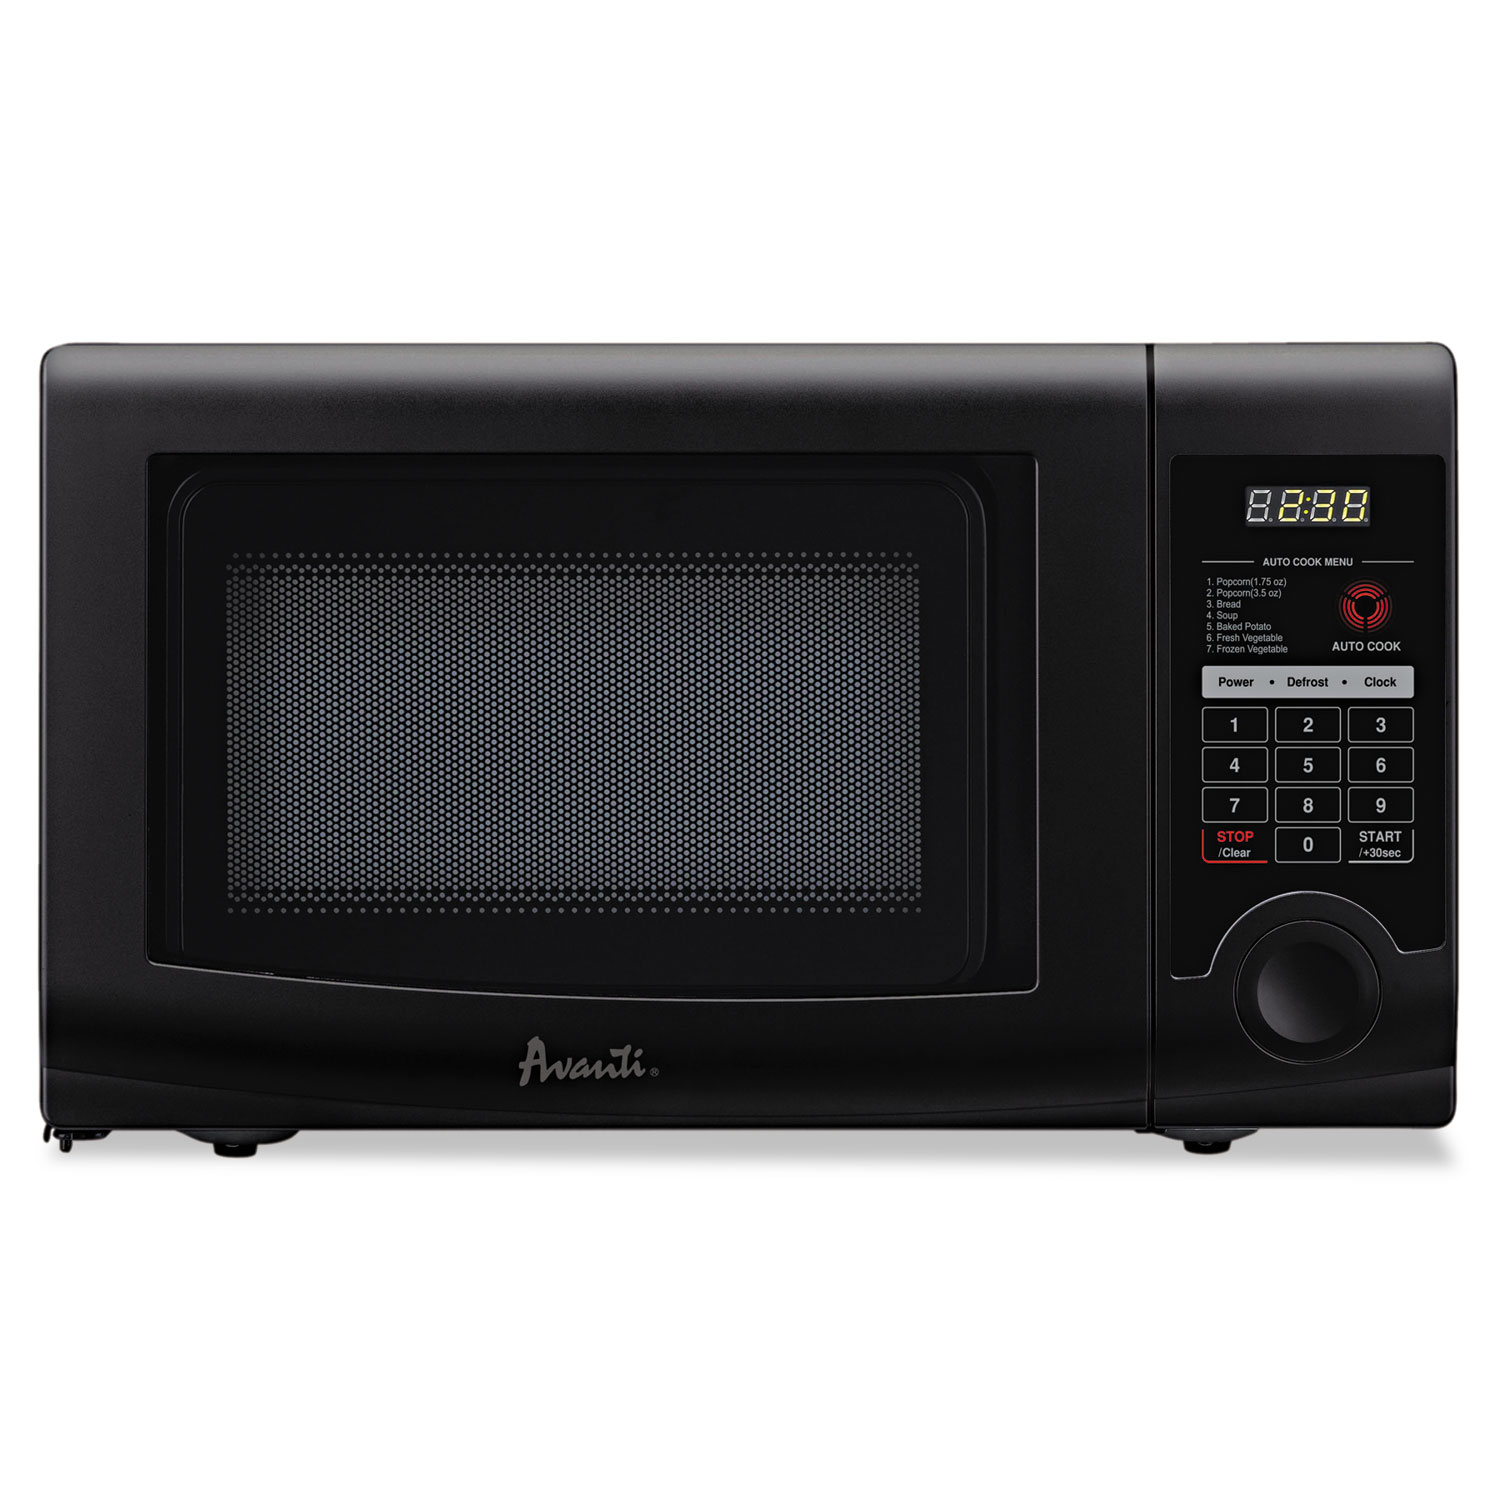 0.7 Cubic Foot Capacity Microwave Oven, 700 Watts, Black - B & S Office